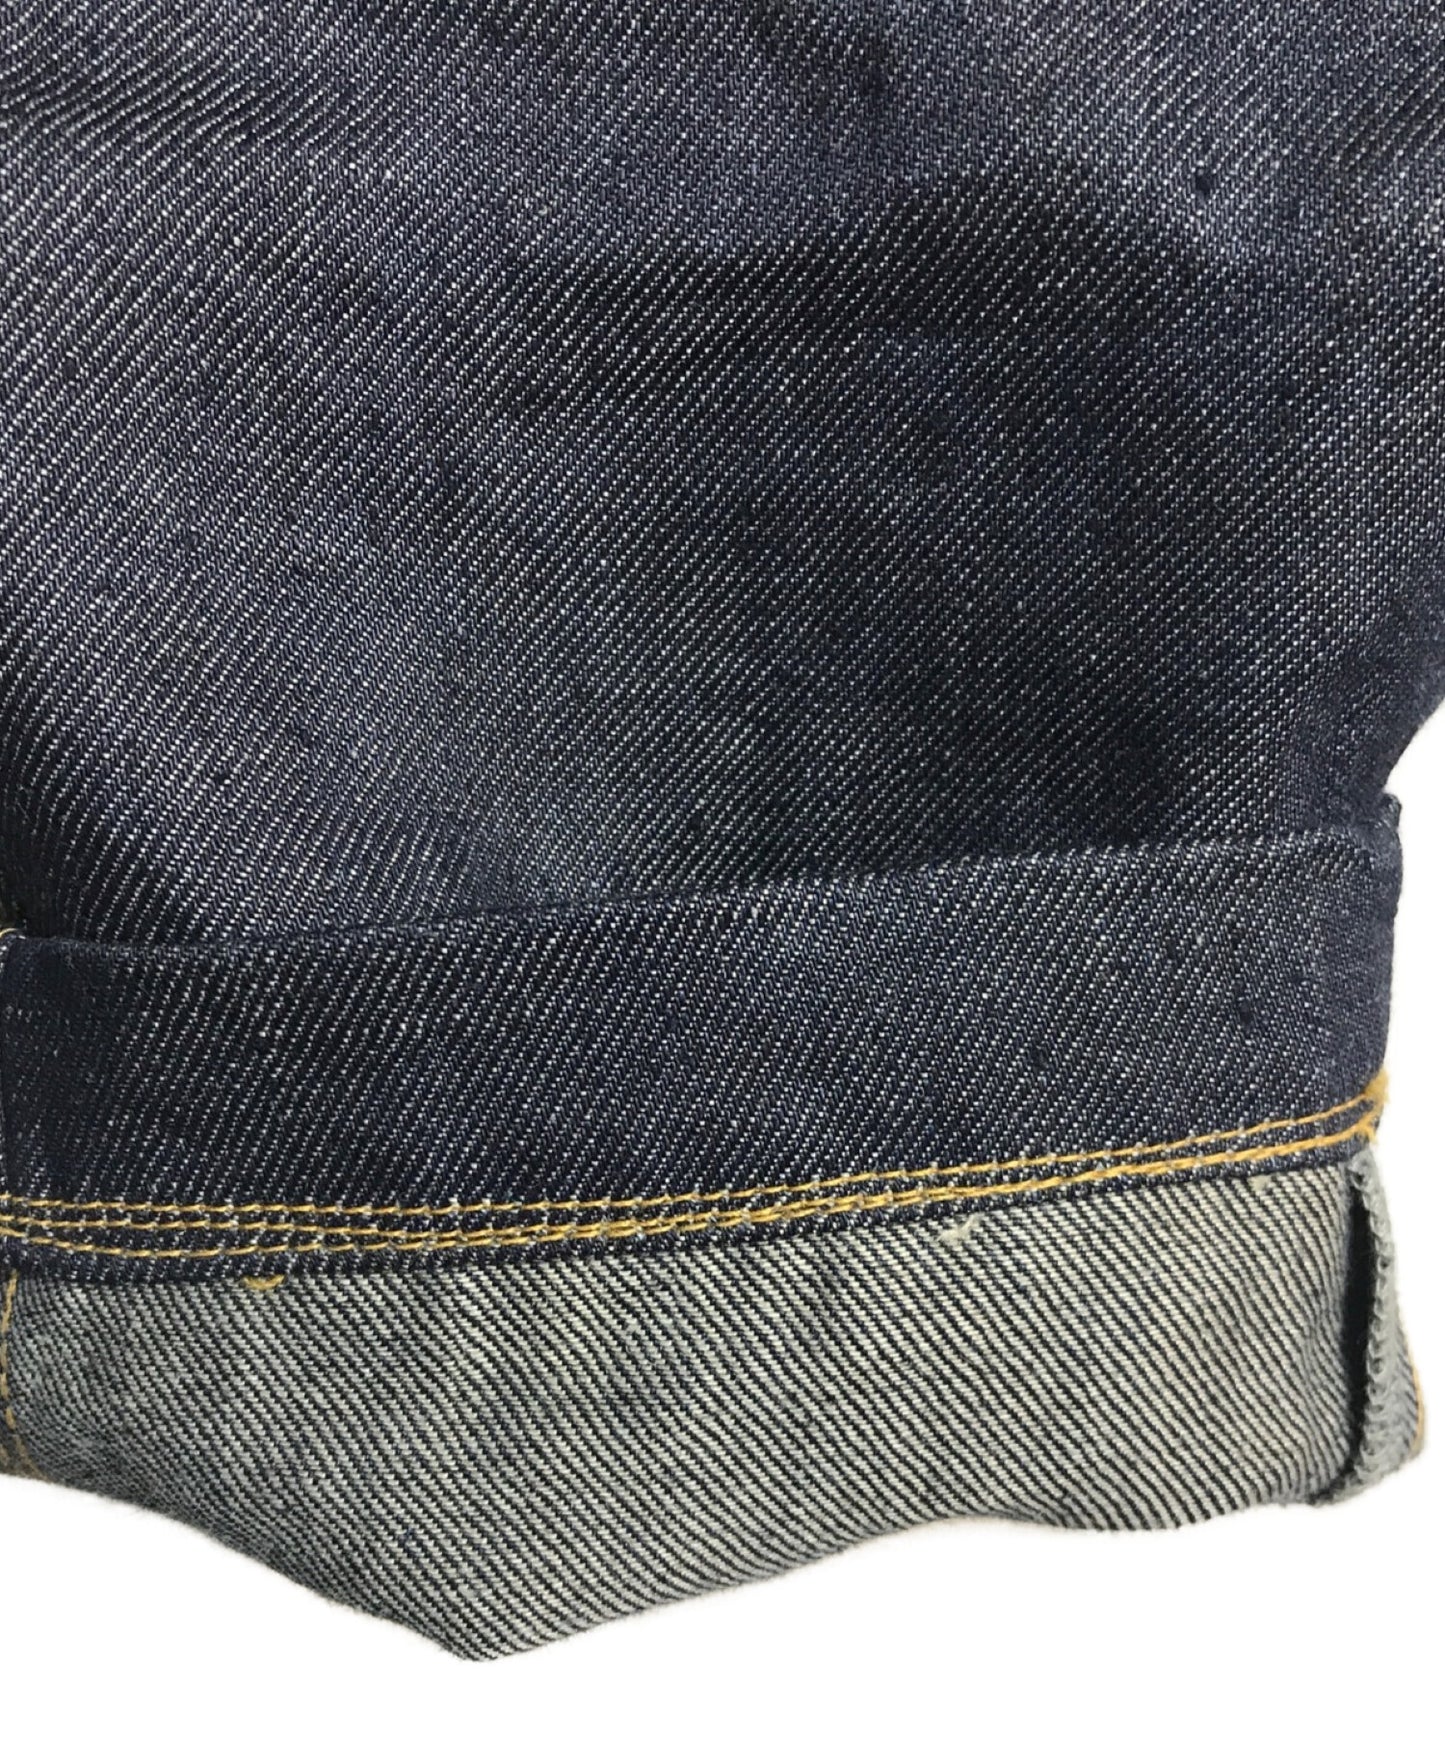 [Pre-owned] COMME des GARCONS JUNYA WATANABE MAN Linen stitched denim pants WG-P025 AD2020 WG-P025